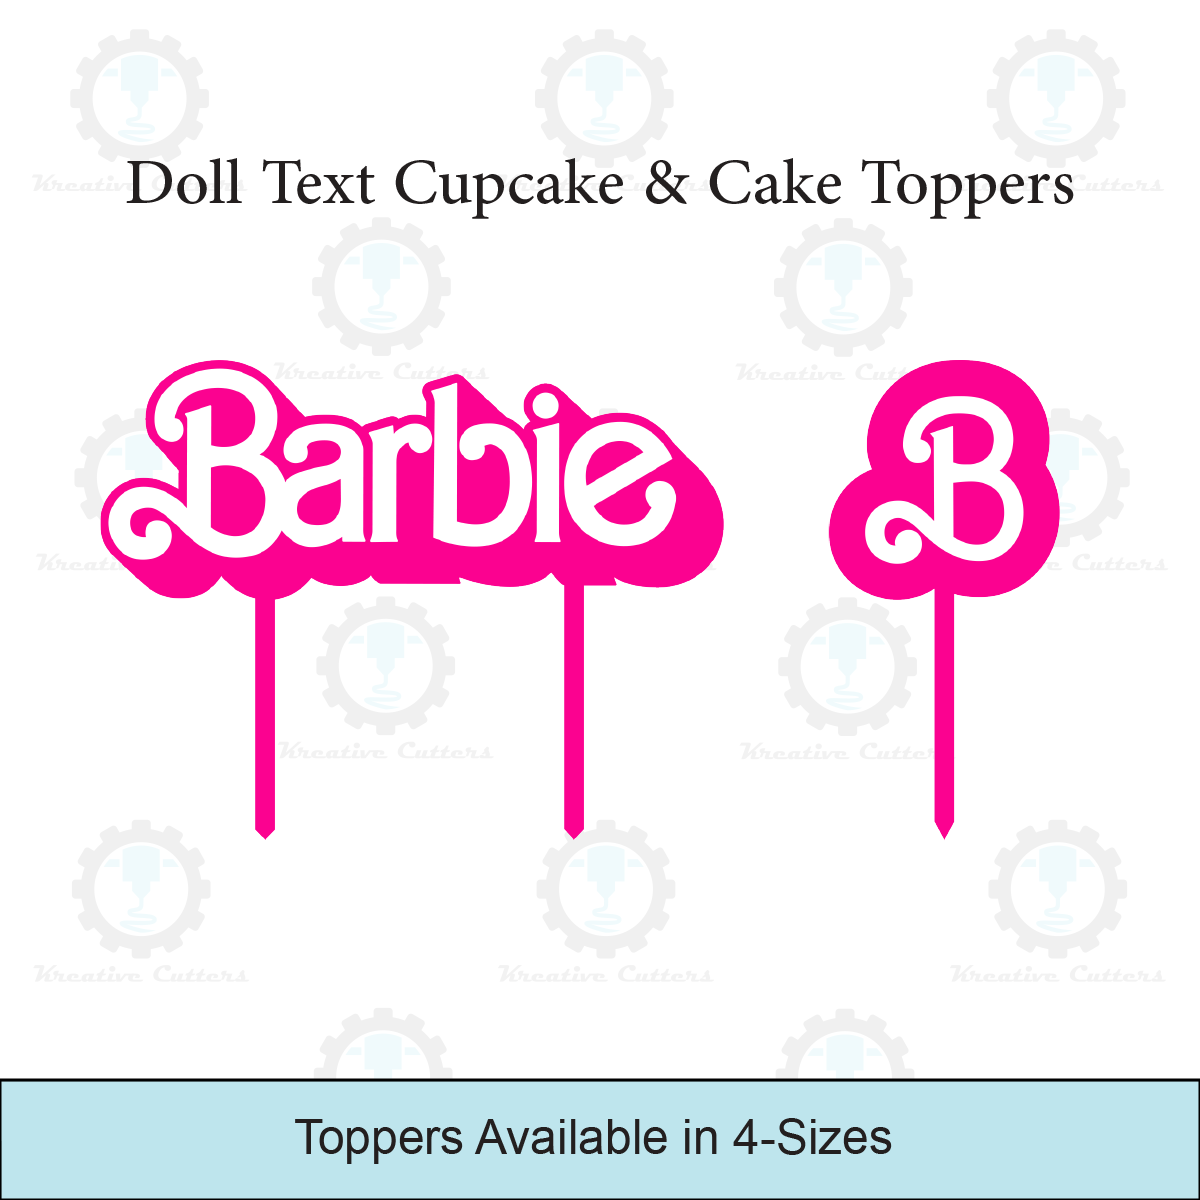 Doll Text Cupcake & Cake Toppers